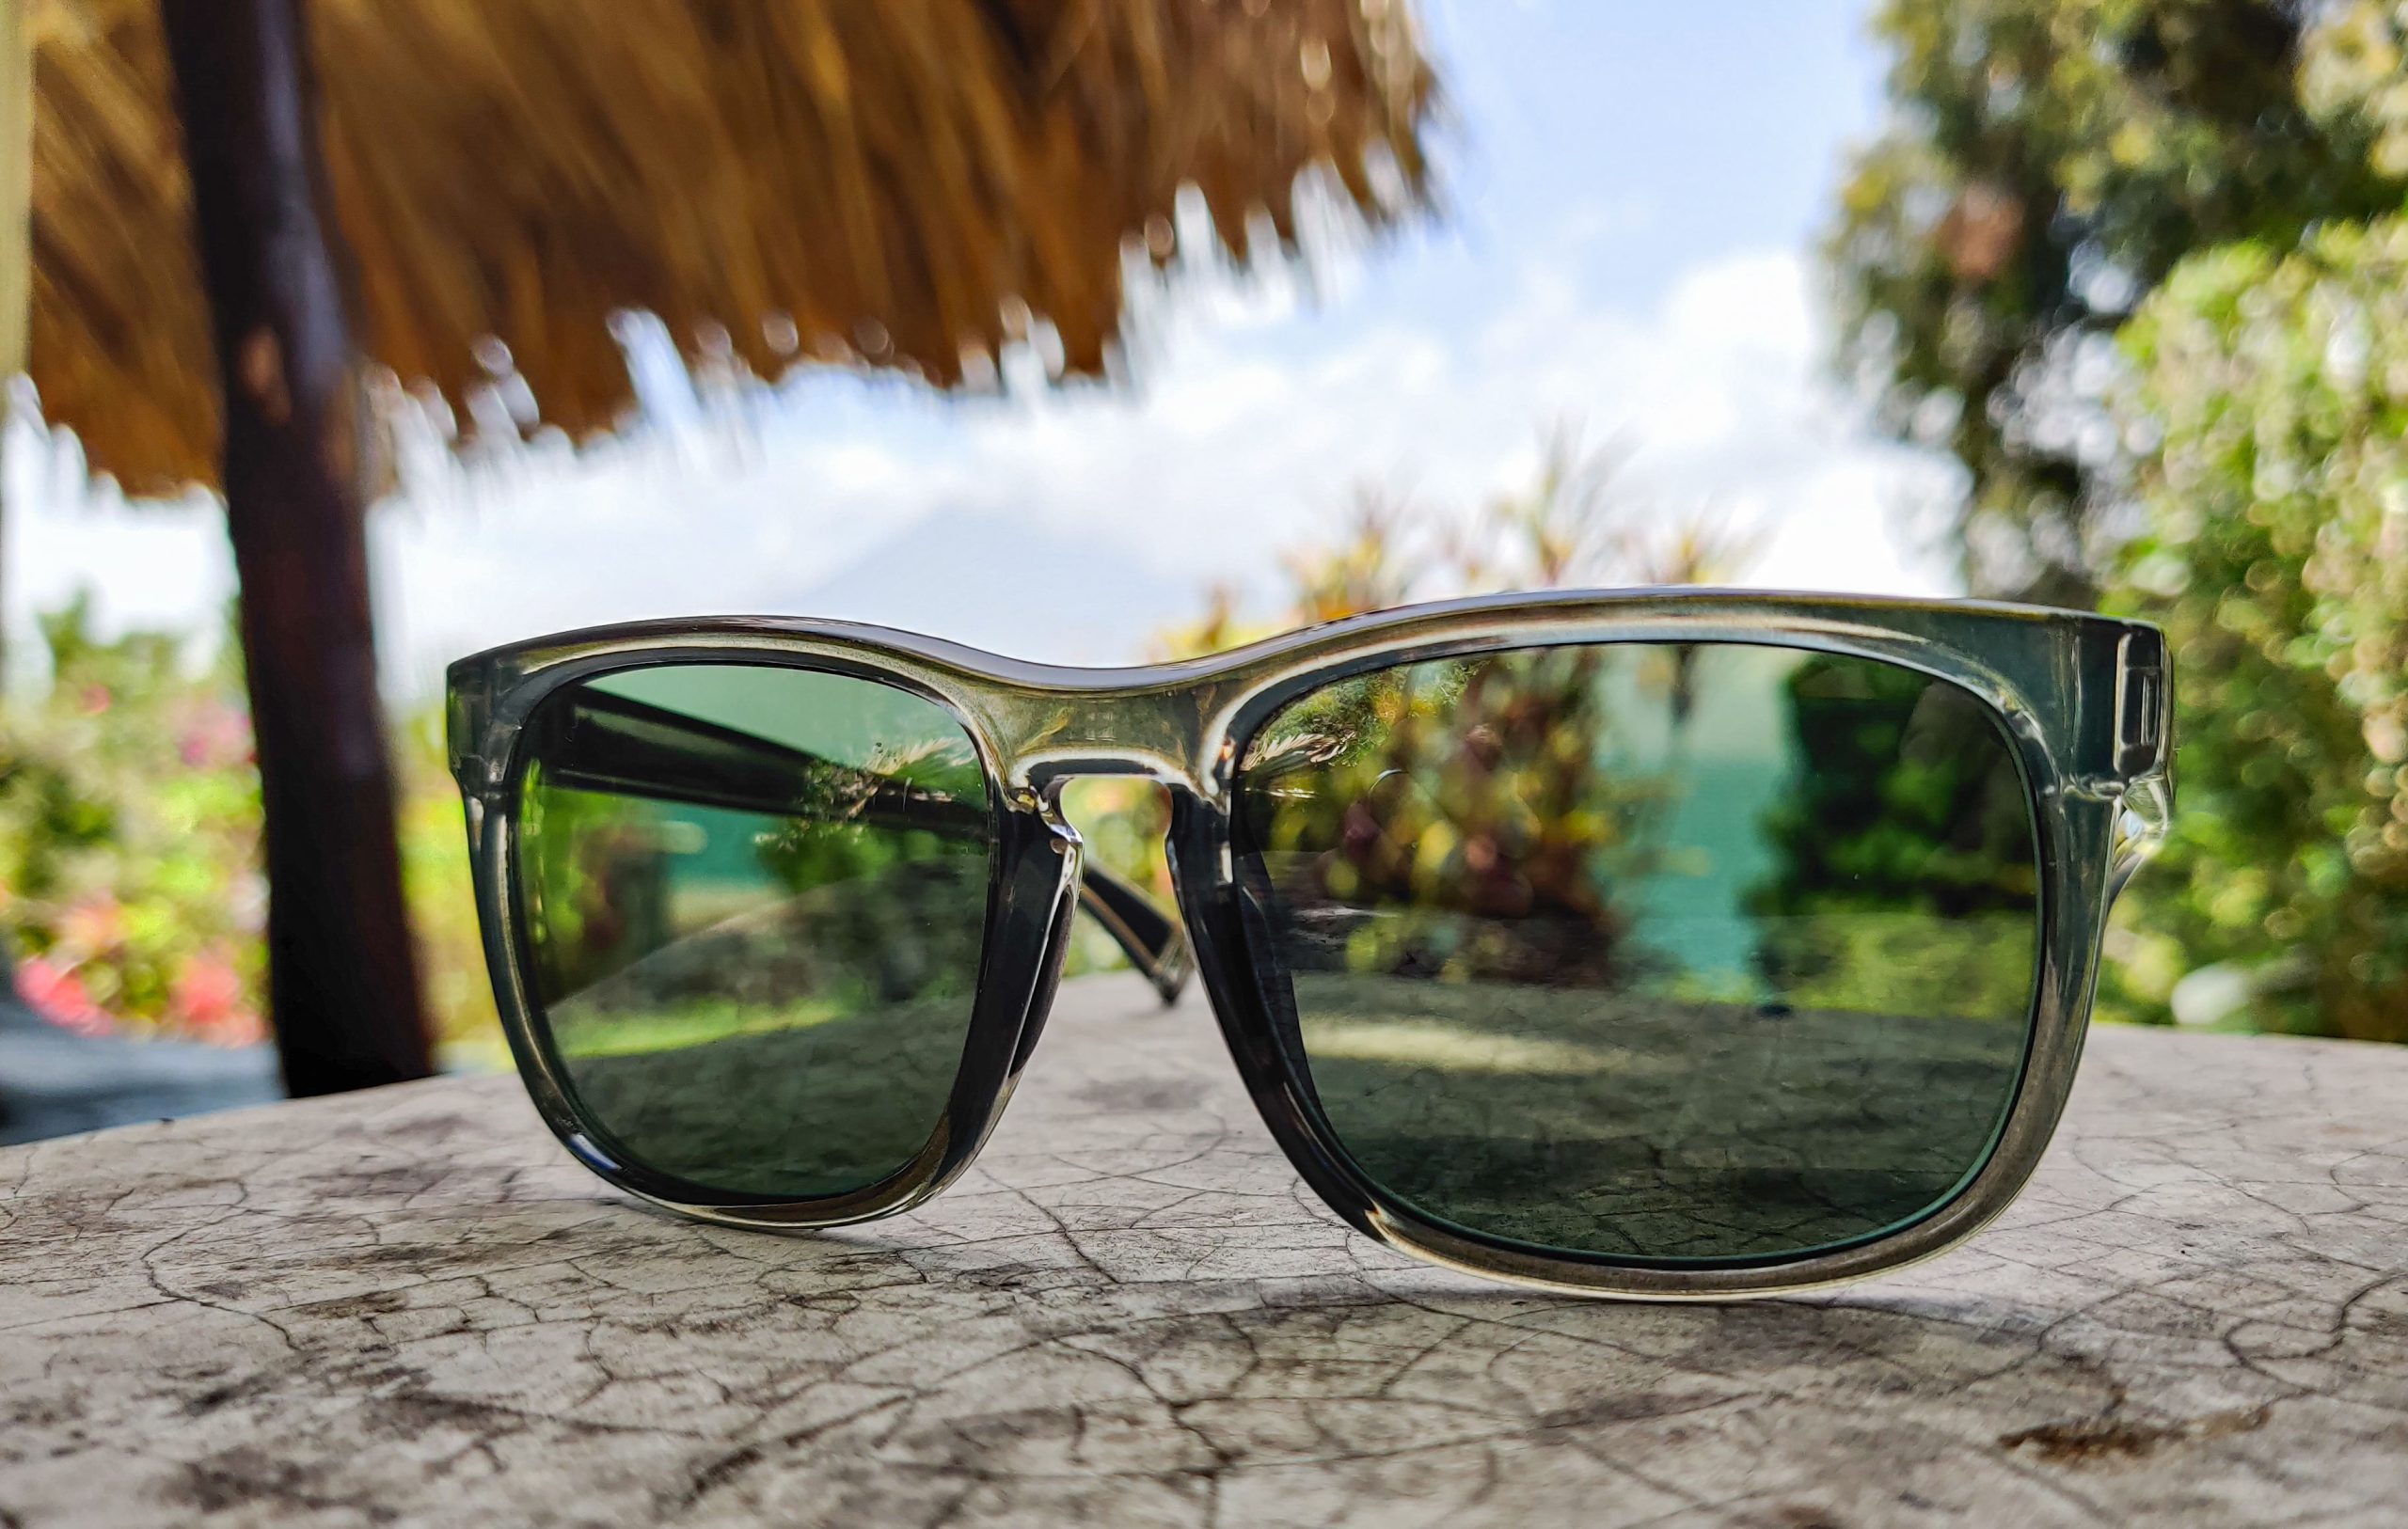 Choosing the right sunglasses for your face shape with Eyelands Optometrists